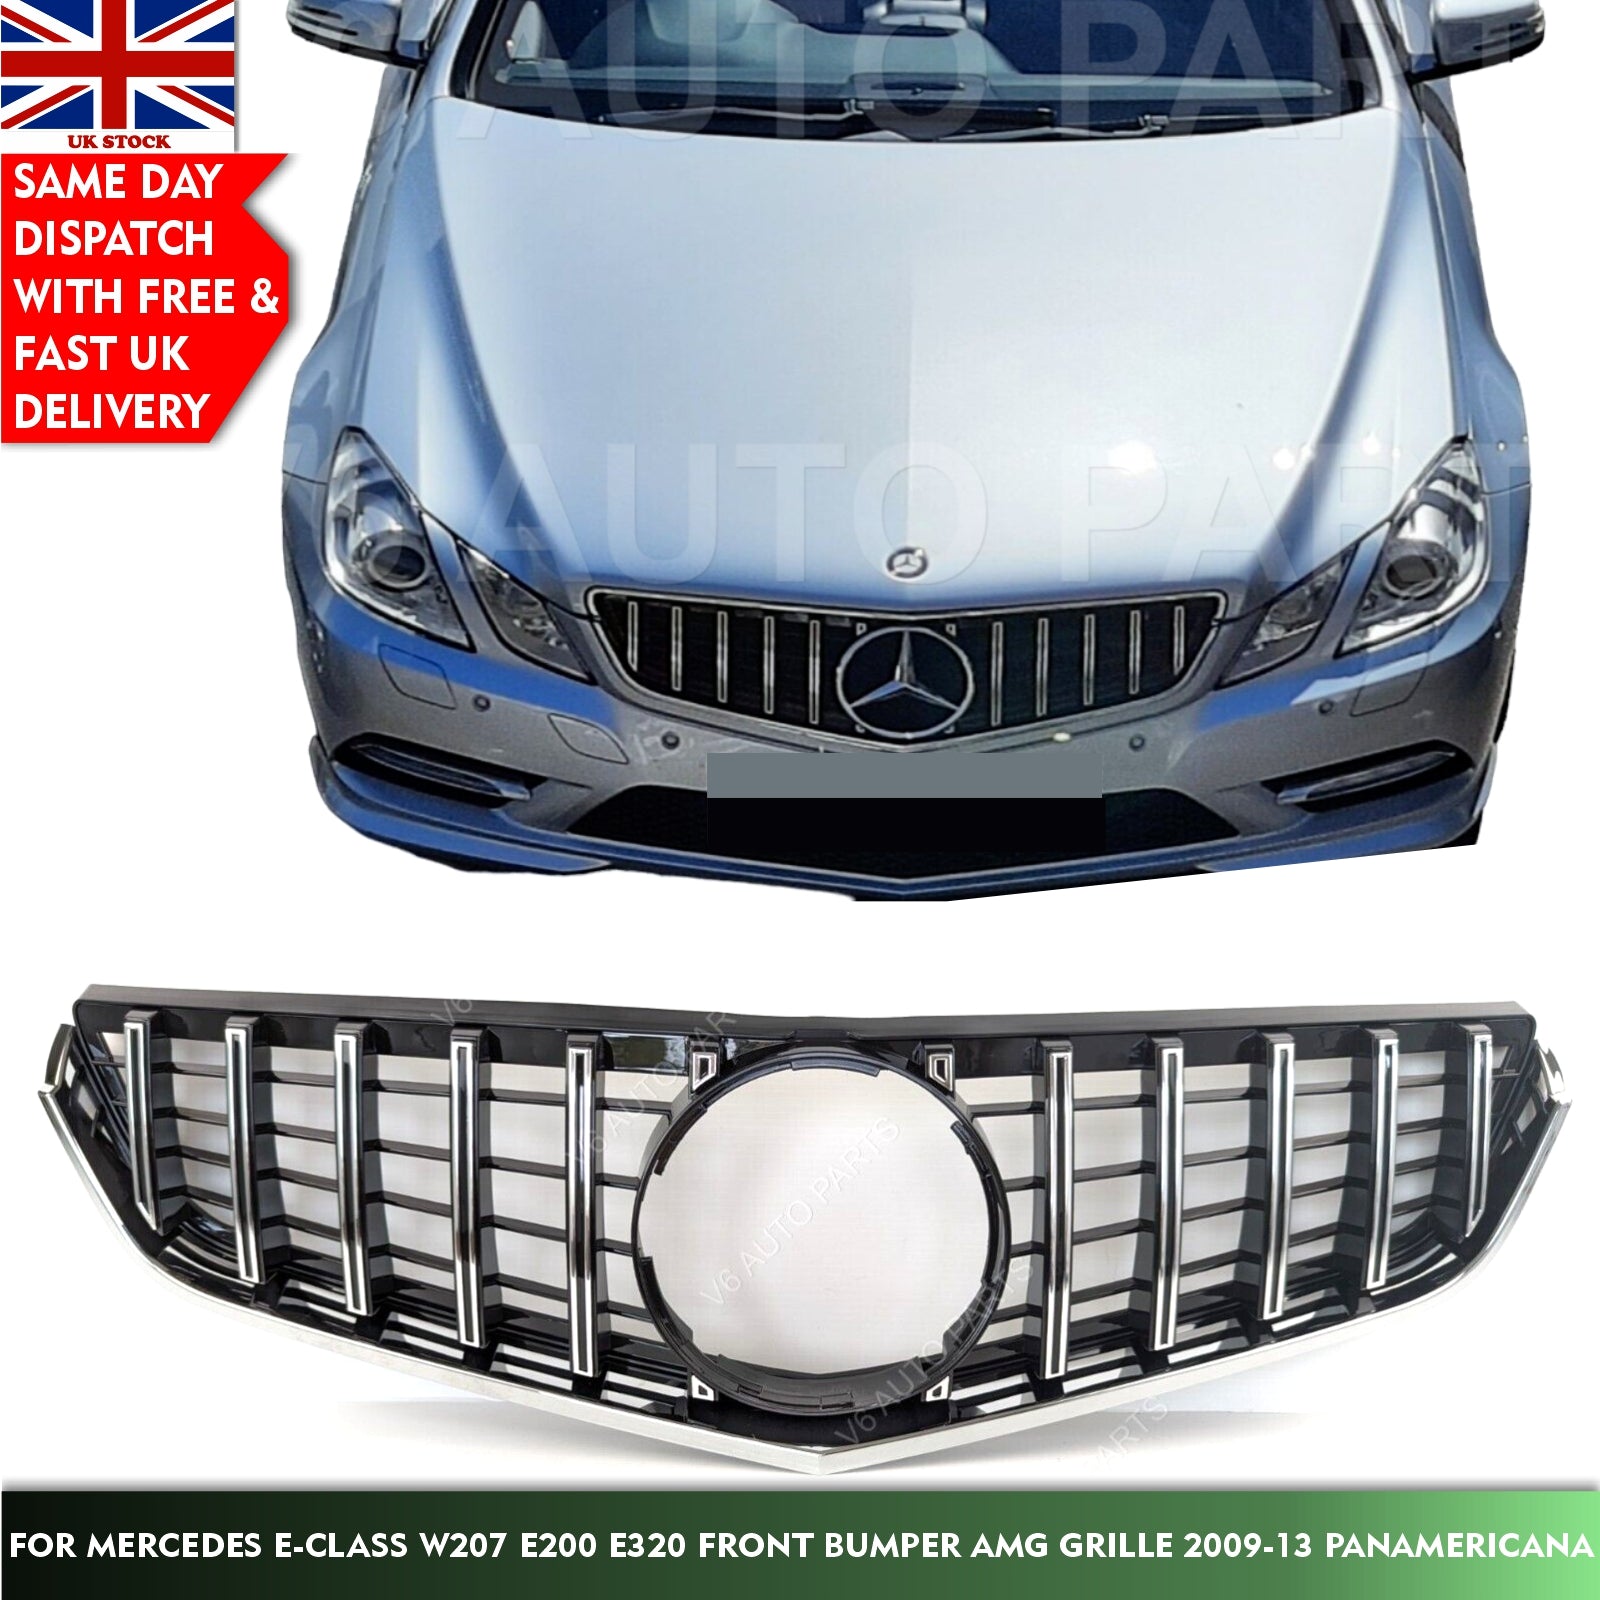 For Mercedes E-Class C207 E500 Front Radiator Grille Panamericana GT AMG 2009-13